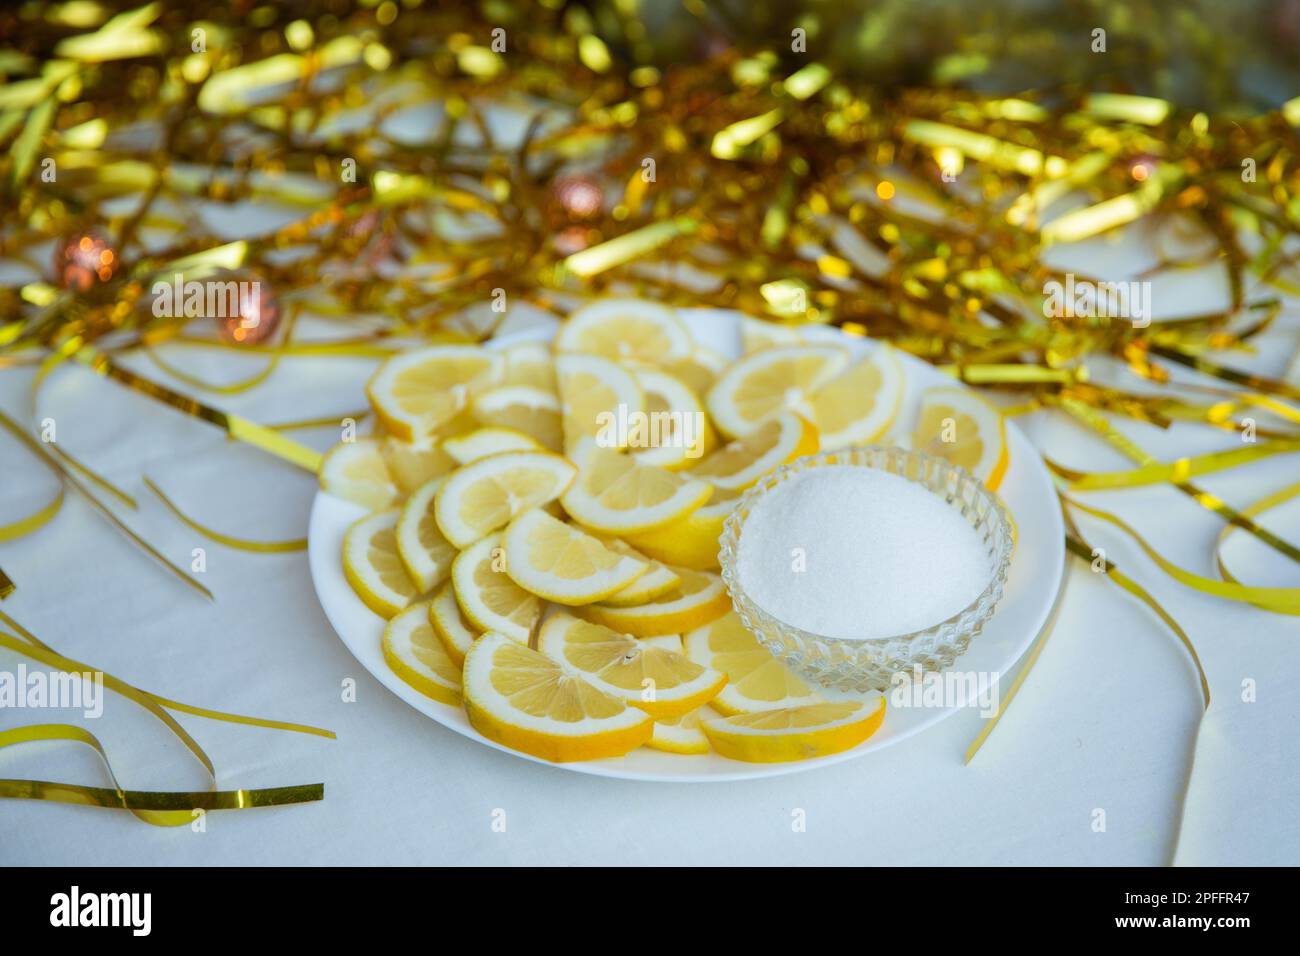 Lemons and sugar on the plate an the table Stock Photo